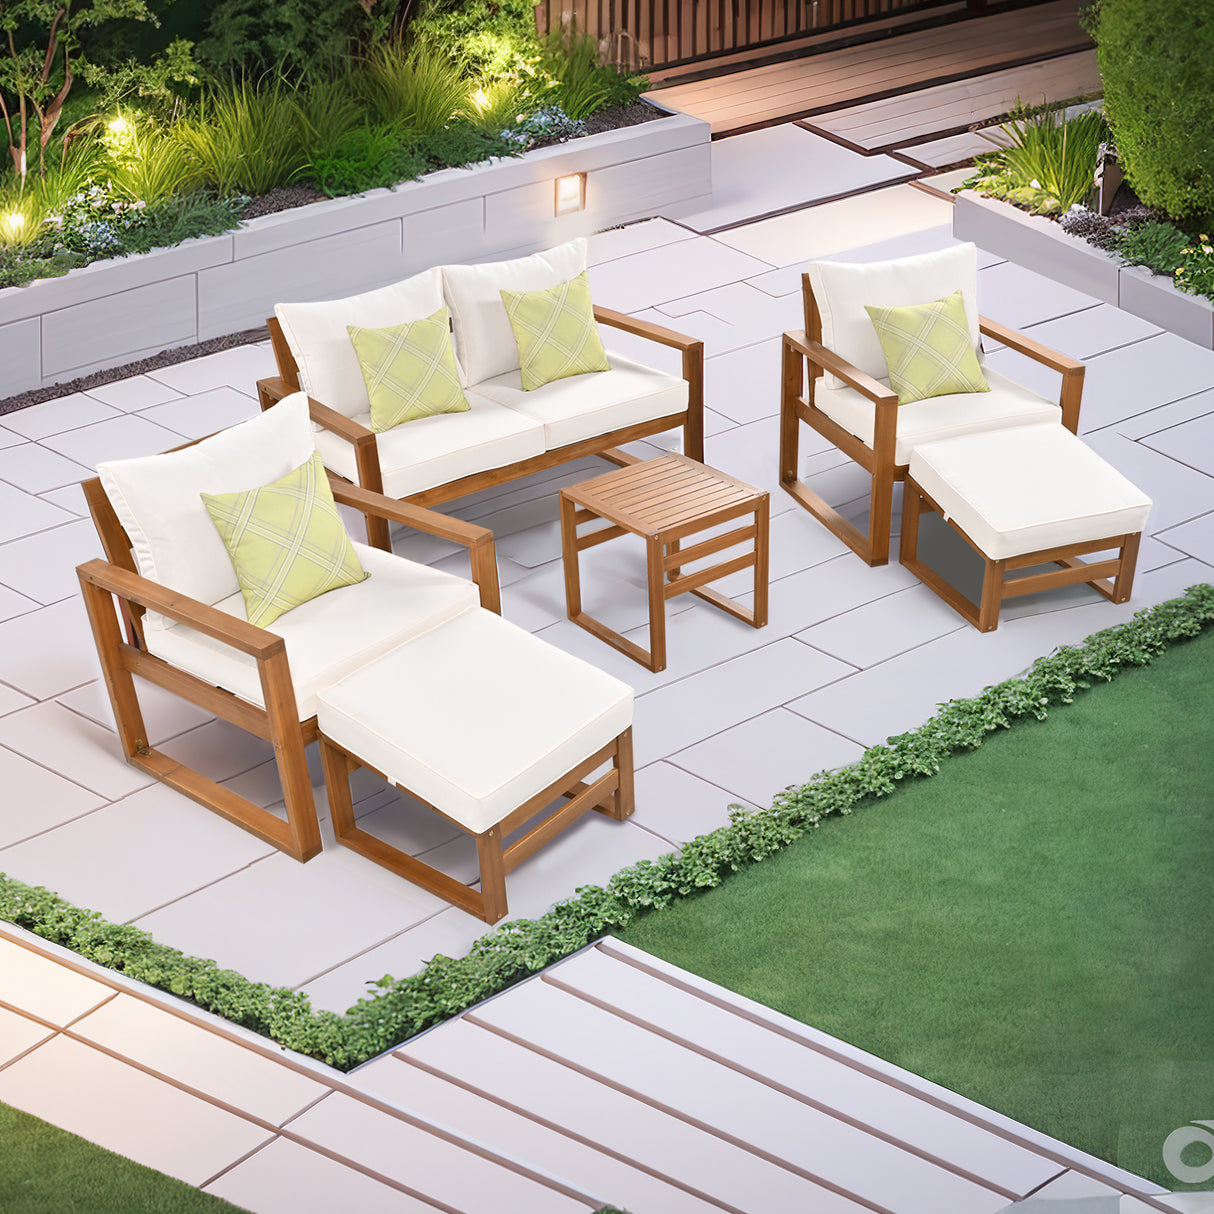 TOPMAX Outdoor Patio Wood 6-Piece Conversation Set, Sectional Garden Seating Groups Chat Set with Ottomans and Cushions for Backyard, Poolside, Balcony, Beige - Home Elegance USA